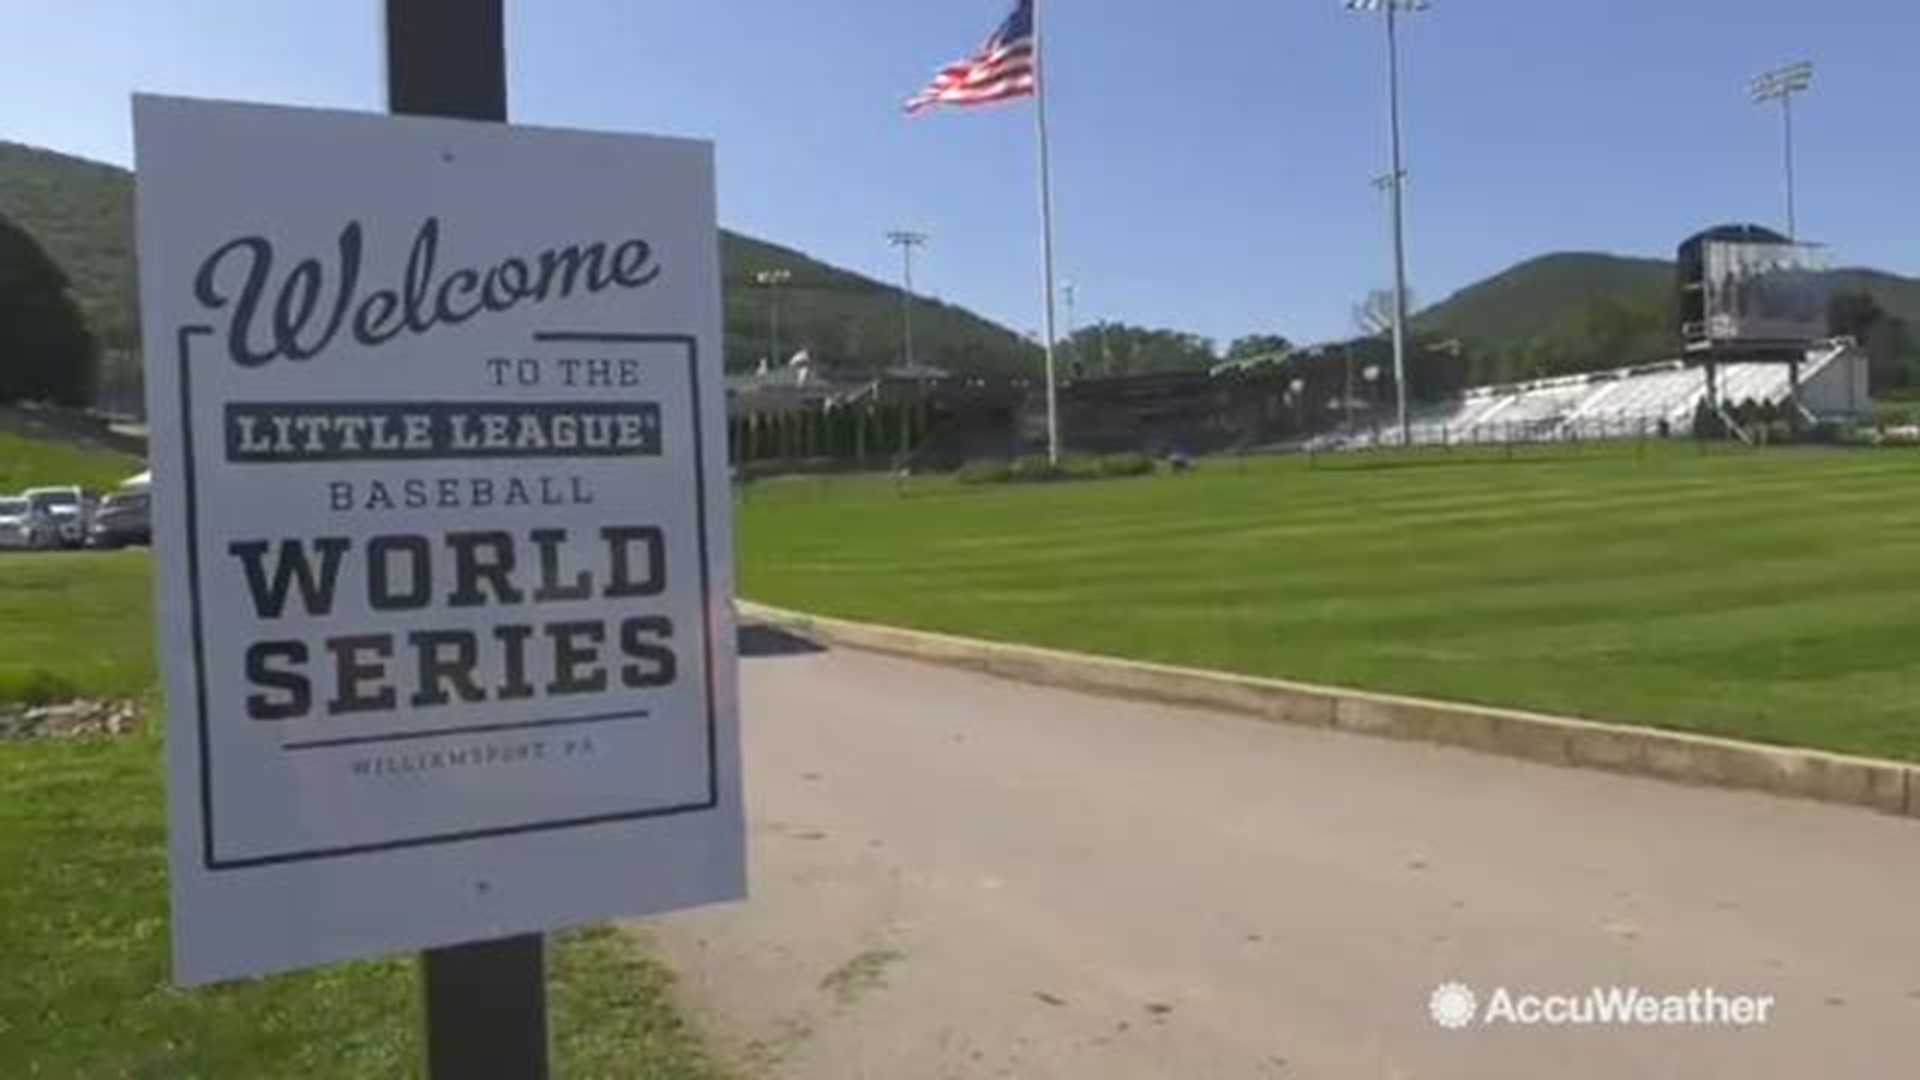 The players who fought for their lives during Hurricane Maria are now living their childhood dreams in Williamsport at the Little League World Series.